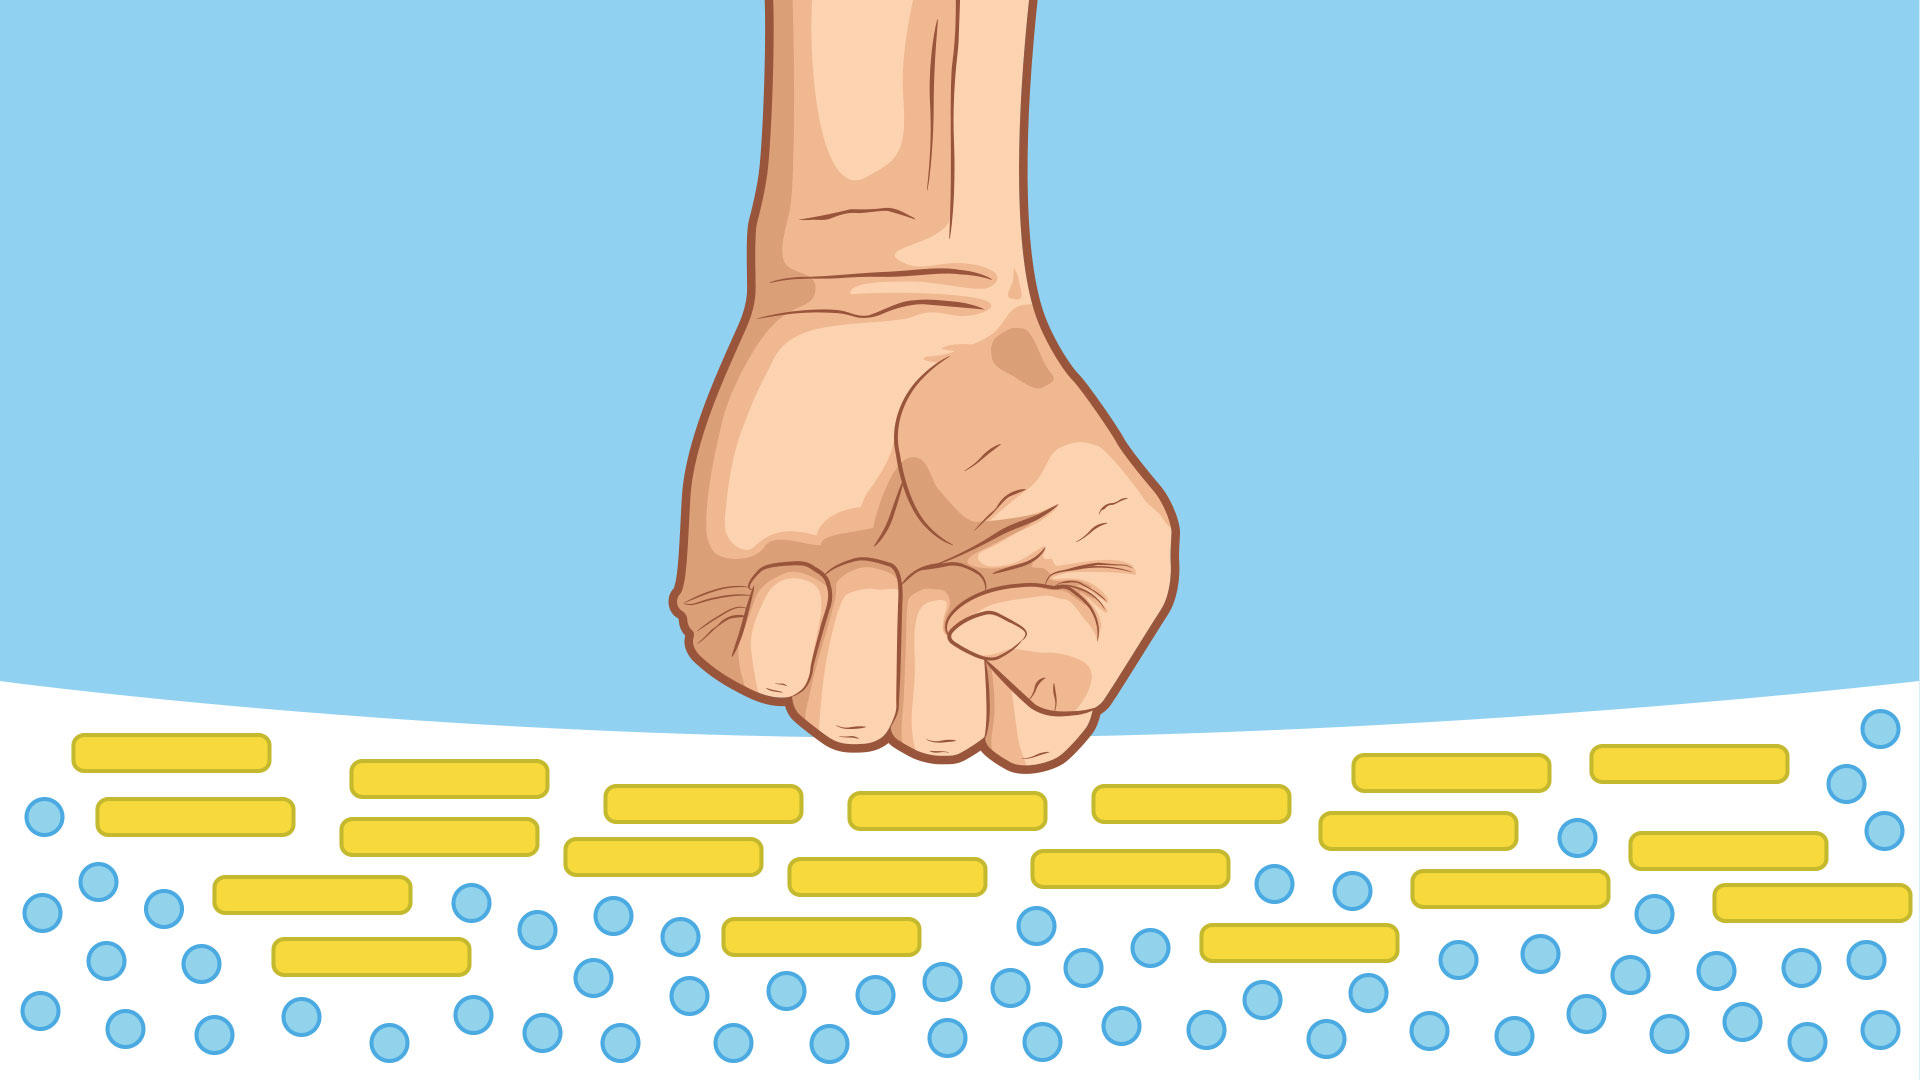 Schematic of a fist punching Oobleck. Long yellow lines are tightly packed together over blue dots to depict how the cornstarch particles get forced together to form a hard surface.